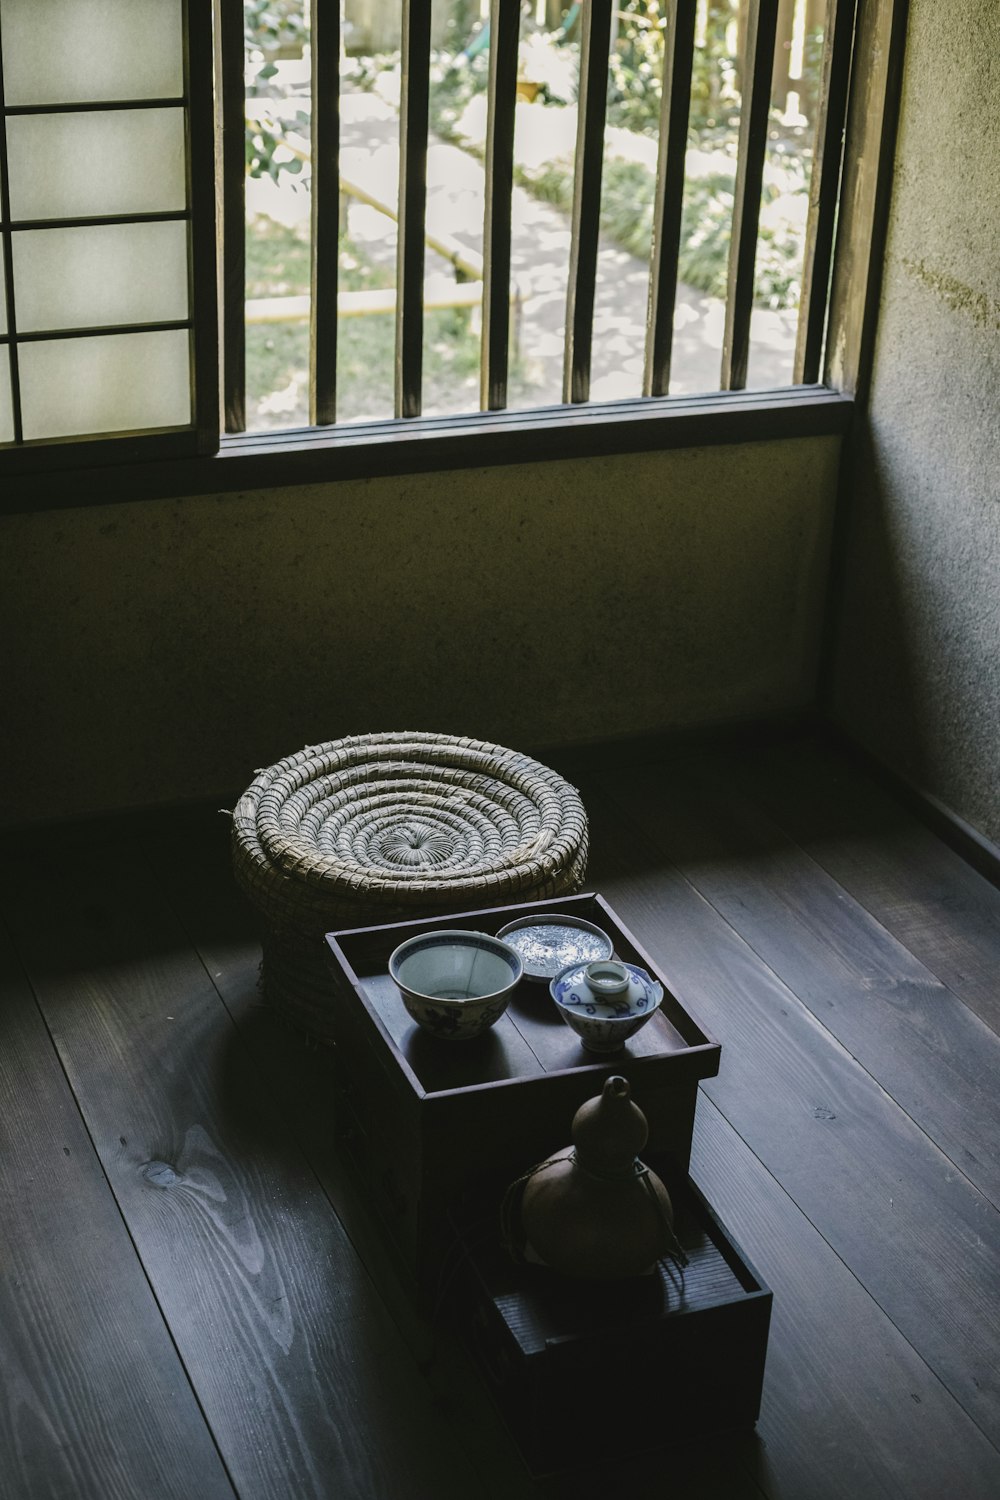 a basket sitting on top of a wooden floor next to a window